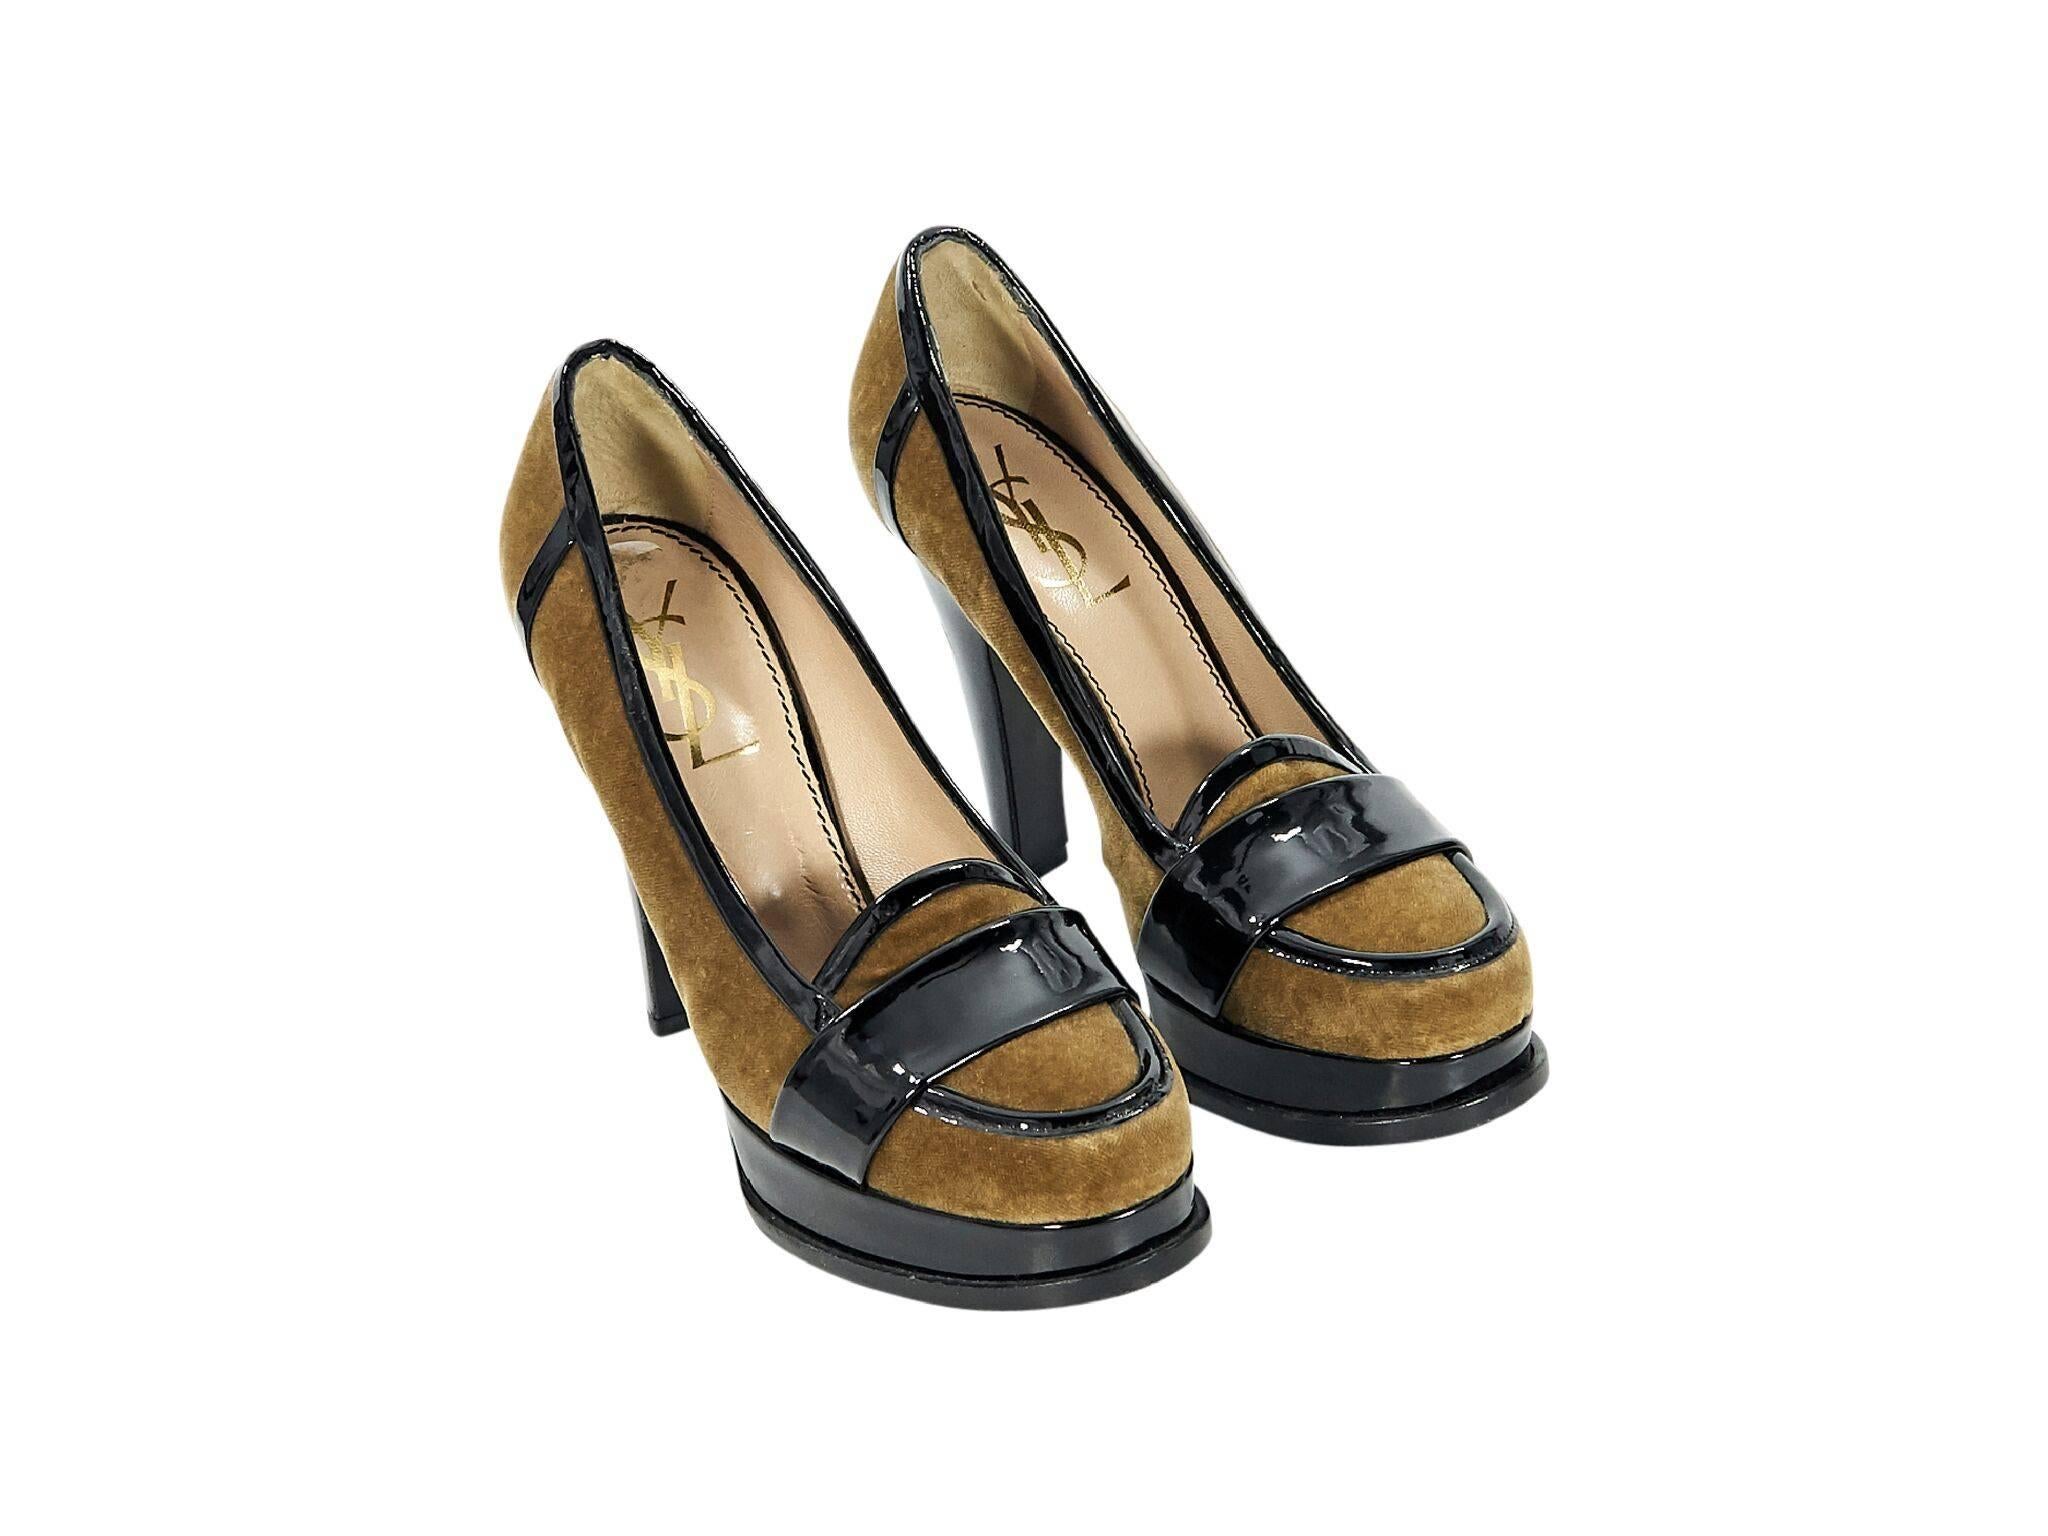 Product details:  Brown velvet platform loafer pumps by Yves Saint Laurent.  Trimmed with black patent leather.  Round moc toe.  Slip-on style. 
Condition: Pre-owned. Very good. 
Est. Retail $598